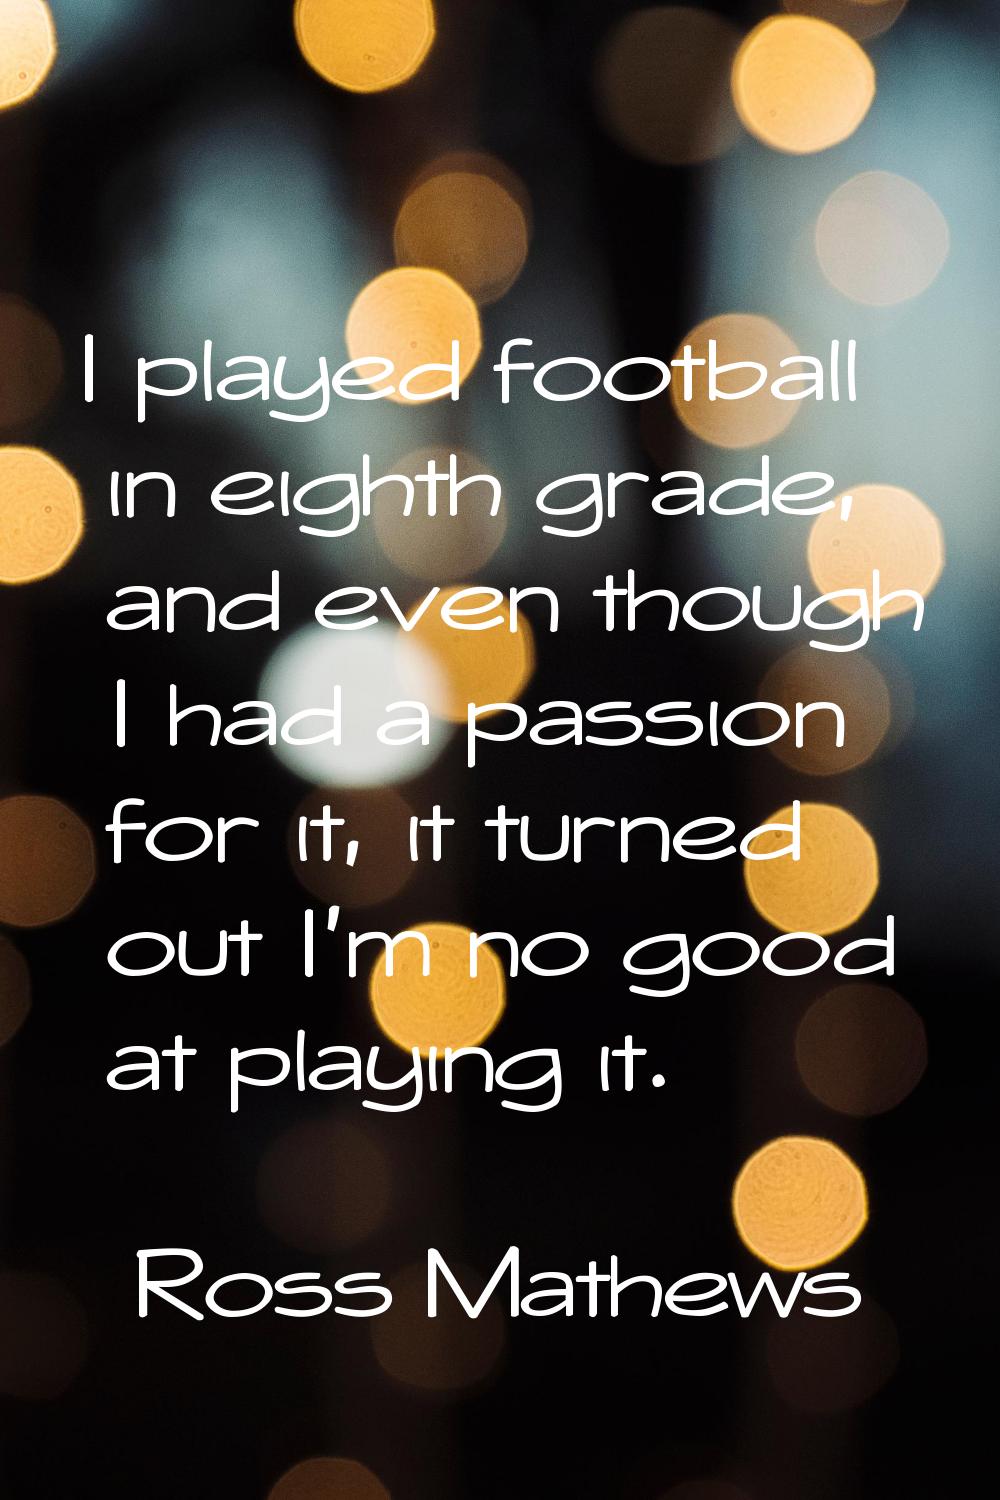 I played football in eighth grade, and even though I had a passion for it, it turned out I'm no goo